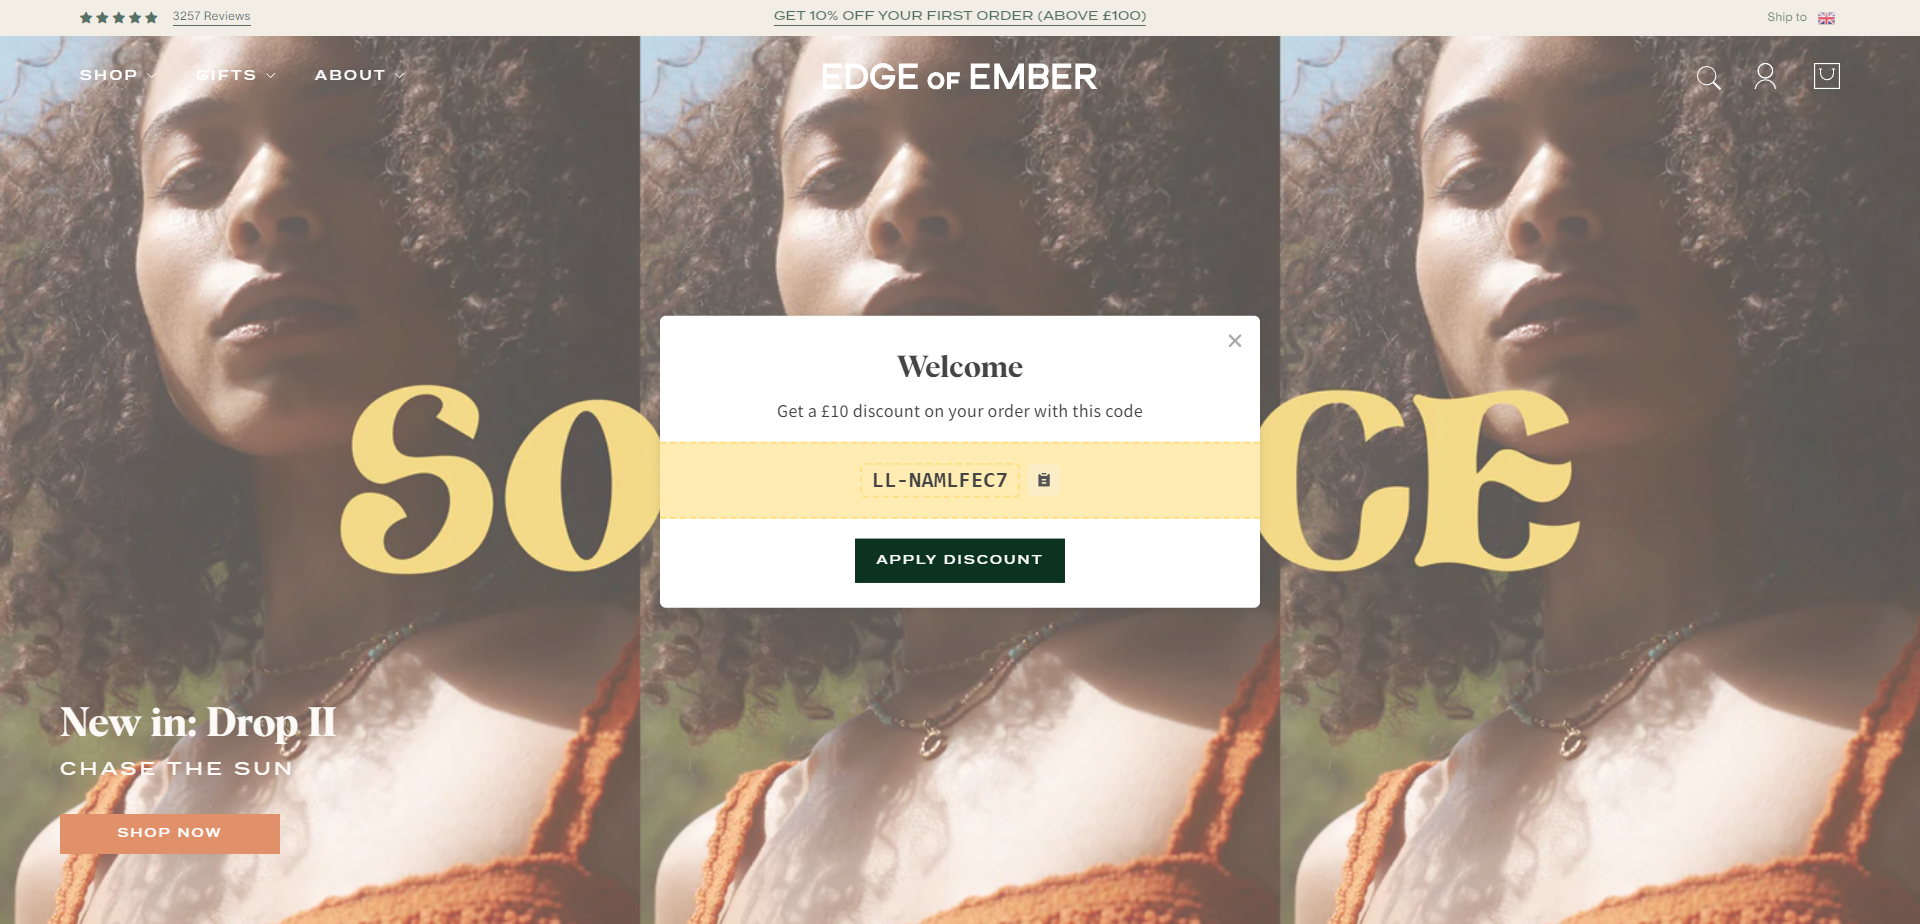 Referral Landing Page for Edge of Ember